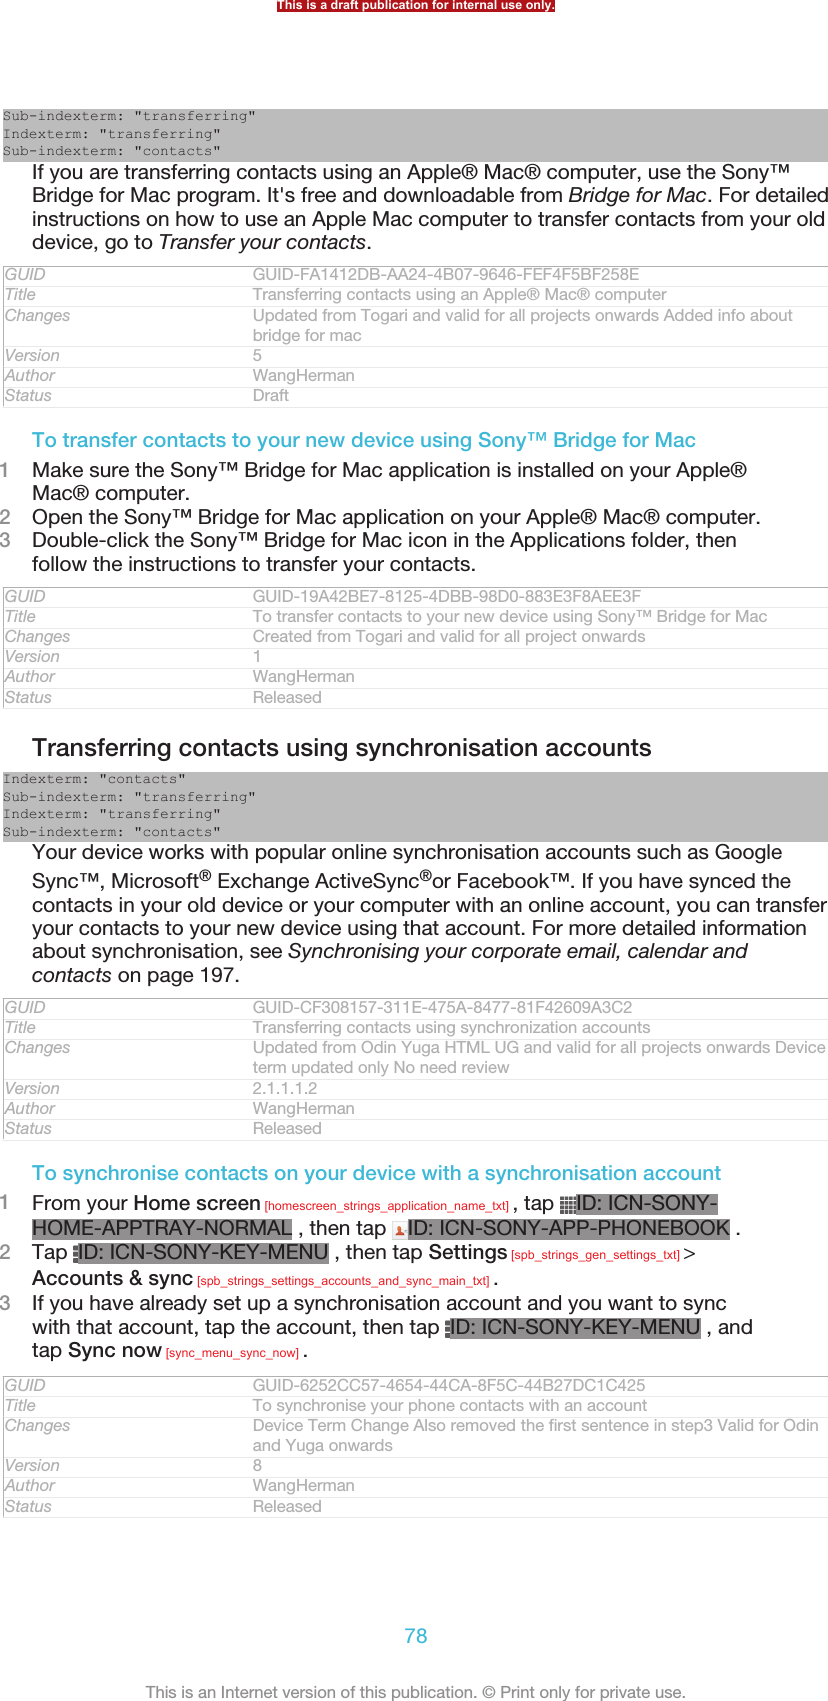 Sub-indexterm: &quot;transferring&quot;Indexterm: &quot;transferring&quot;Sub-indexterm: &quot;contacts&quot;If you are transferring contacts using an Apple® Mac® computer, use the Sony™Bridge for Mac program. It&apos;s free and downloadable from Bridge for Mac. For detailedinstructions on how to use an Apple Mac computer to transfer contacts from your olddevice, go to Transfer your contacts.GUID GUID-FA1412DB-AA24-4B07-9646-FEF4F5BF258ETitle Transferring contacts using an Apple® Mac® computerChanges Updated from Togari and valid for all projects onwards Added info aboutbridge for macVersion 5Author WangHermanStatus DraftTo transfer contacts to your new device using Sony™ Bridge for Mac1Make sure the Sony™ Bridge for Mac application is installed on your Apple®Mac® computer.2Open the Sony™ Bridge for Mac application on your Apple® Mac® computer.3Double-click the Sony™ Bridge for Mac icon in the Applications folder, thenfollow the instructions to transfer your contacts.GUID GUID-19A42BE7-8125-4DBB-98D0-883E3F8AEE3FTitle To transfer contacts to your new device using Sony™ Bridge for MacChanges Created from Togari and valid for all project onwardsVersion 1Author WangHermanStatus ReleasedTransferring contacts using synchronisation accountsIndexterm: &quot;contacts&quot;Sub-indexterm: &quot;transferring&quot;Indexterm: &quot;transferring&quot;Sub-indexterm: &quot;contacts&quot;Your device works with popular online synchronisation accounts such as GoogleSync™, Microsoft® Exchange ActiveSync®or Facebook™. If you have synced thecontacts in your old device or your computer with an online account, you can transferyour contacts to your new device using that account. For more detailed informationabout synchronisation, see Synchronising your corporate email, calendar andcontacts on page 197.GUID GUID-CF308157-311E-475A-8477-81F42609A3C2Title Transferring contacts using synchronization accountsChanges Updated from Odin Yuga HTML UG and valid for all projects onwards Deviceterm updated only No need reviewVersion 2.1.1.1.2Author WangHermanStatus ReleasedTo synchronise contacts on your device with a synchronisation account1From your Home screen [homescreen_strings_application_name_txt] , tap  ID: ICN-SONY-HOME-APPTRAY-NORMAL , then tap  ID: ICN-SONY-APP-PHONEBOOK .2Tap  ID: ICN-SONY-KEY-MENU , then tap Settings [spb_strings_gen_settings_txt] &gt;Accounts &amp; sync [spb_strings_settings_accounts_and_sync_main_txt] .3If you have already set up a synchronisation account and you want to syncwith that account, tap the account, then tap  ID: ICN-SONY-KEY-MENU , andtap Sync now [sync_menu_sync_now] .GUID GUID-6252CC57-4654-44CA-8F5C-44B27DC1C425Title To synchronise your phone contacts with an accountChanges Device Term Change Also removed the first sentence in step3 Valid for Odinand Yuga onwardsVersion 8Author WangHermanStatus ReleasedThis is a draft publication for internal use only.78This is an Internet version of this publication. © Print only for private use.